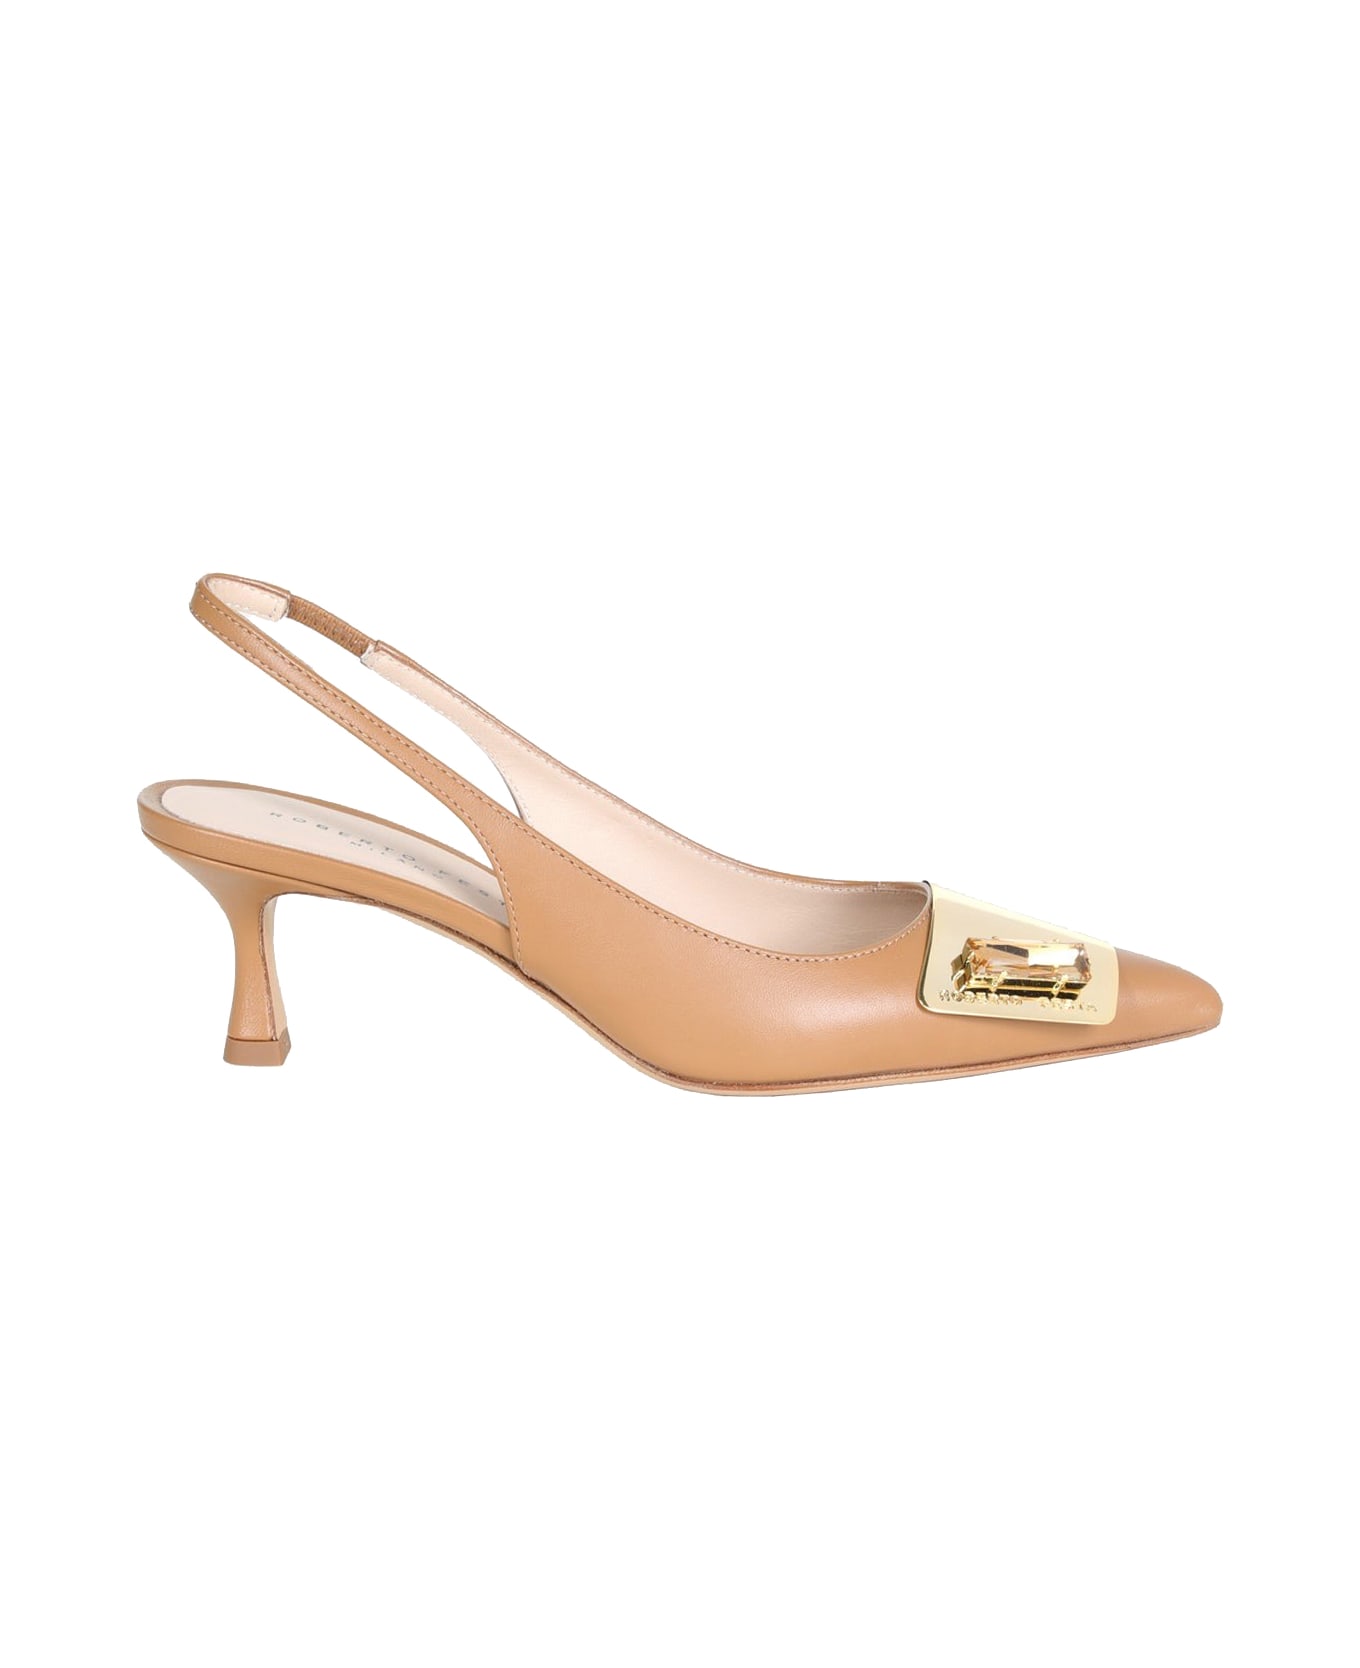 Roberto Festa Chanel Slingback In Softy Camel With Plaque Accessory - CAMEL